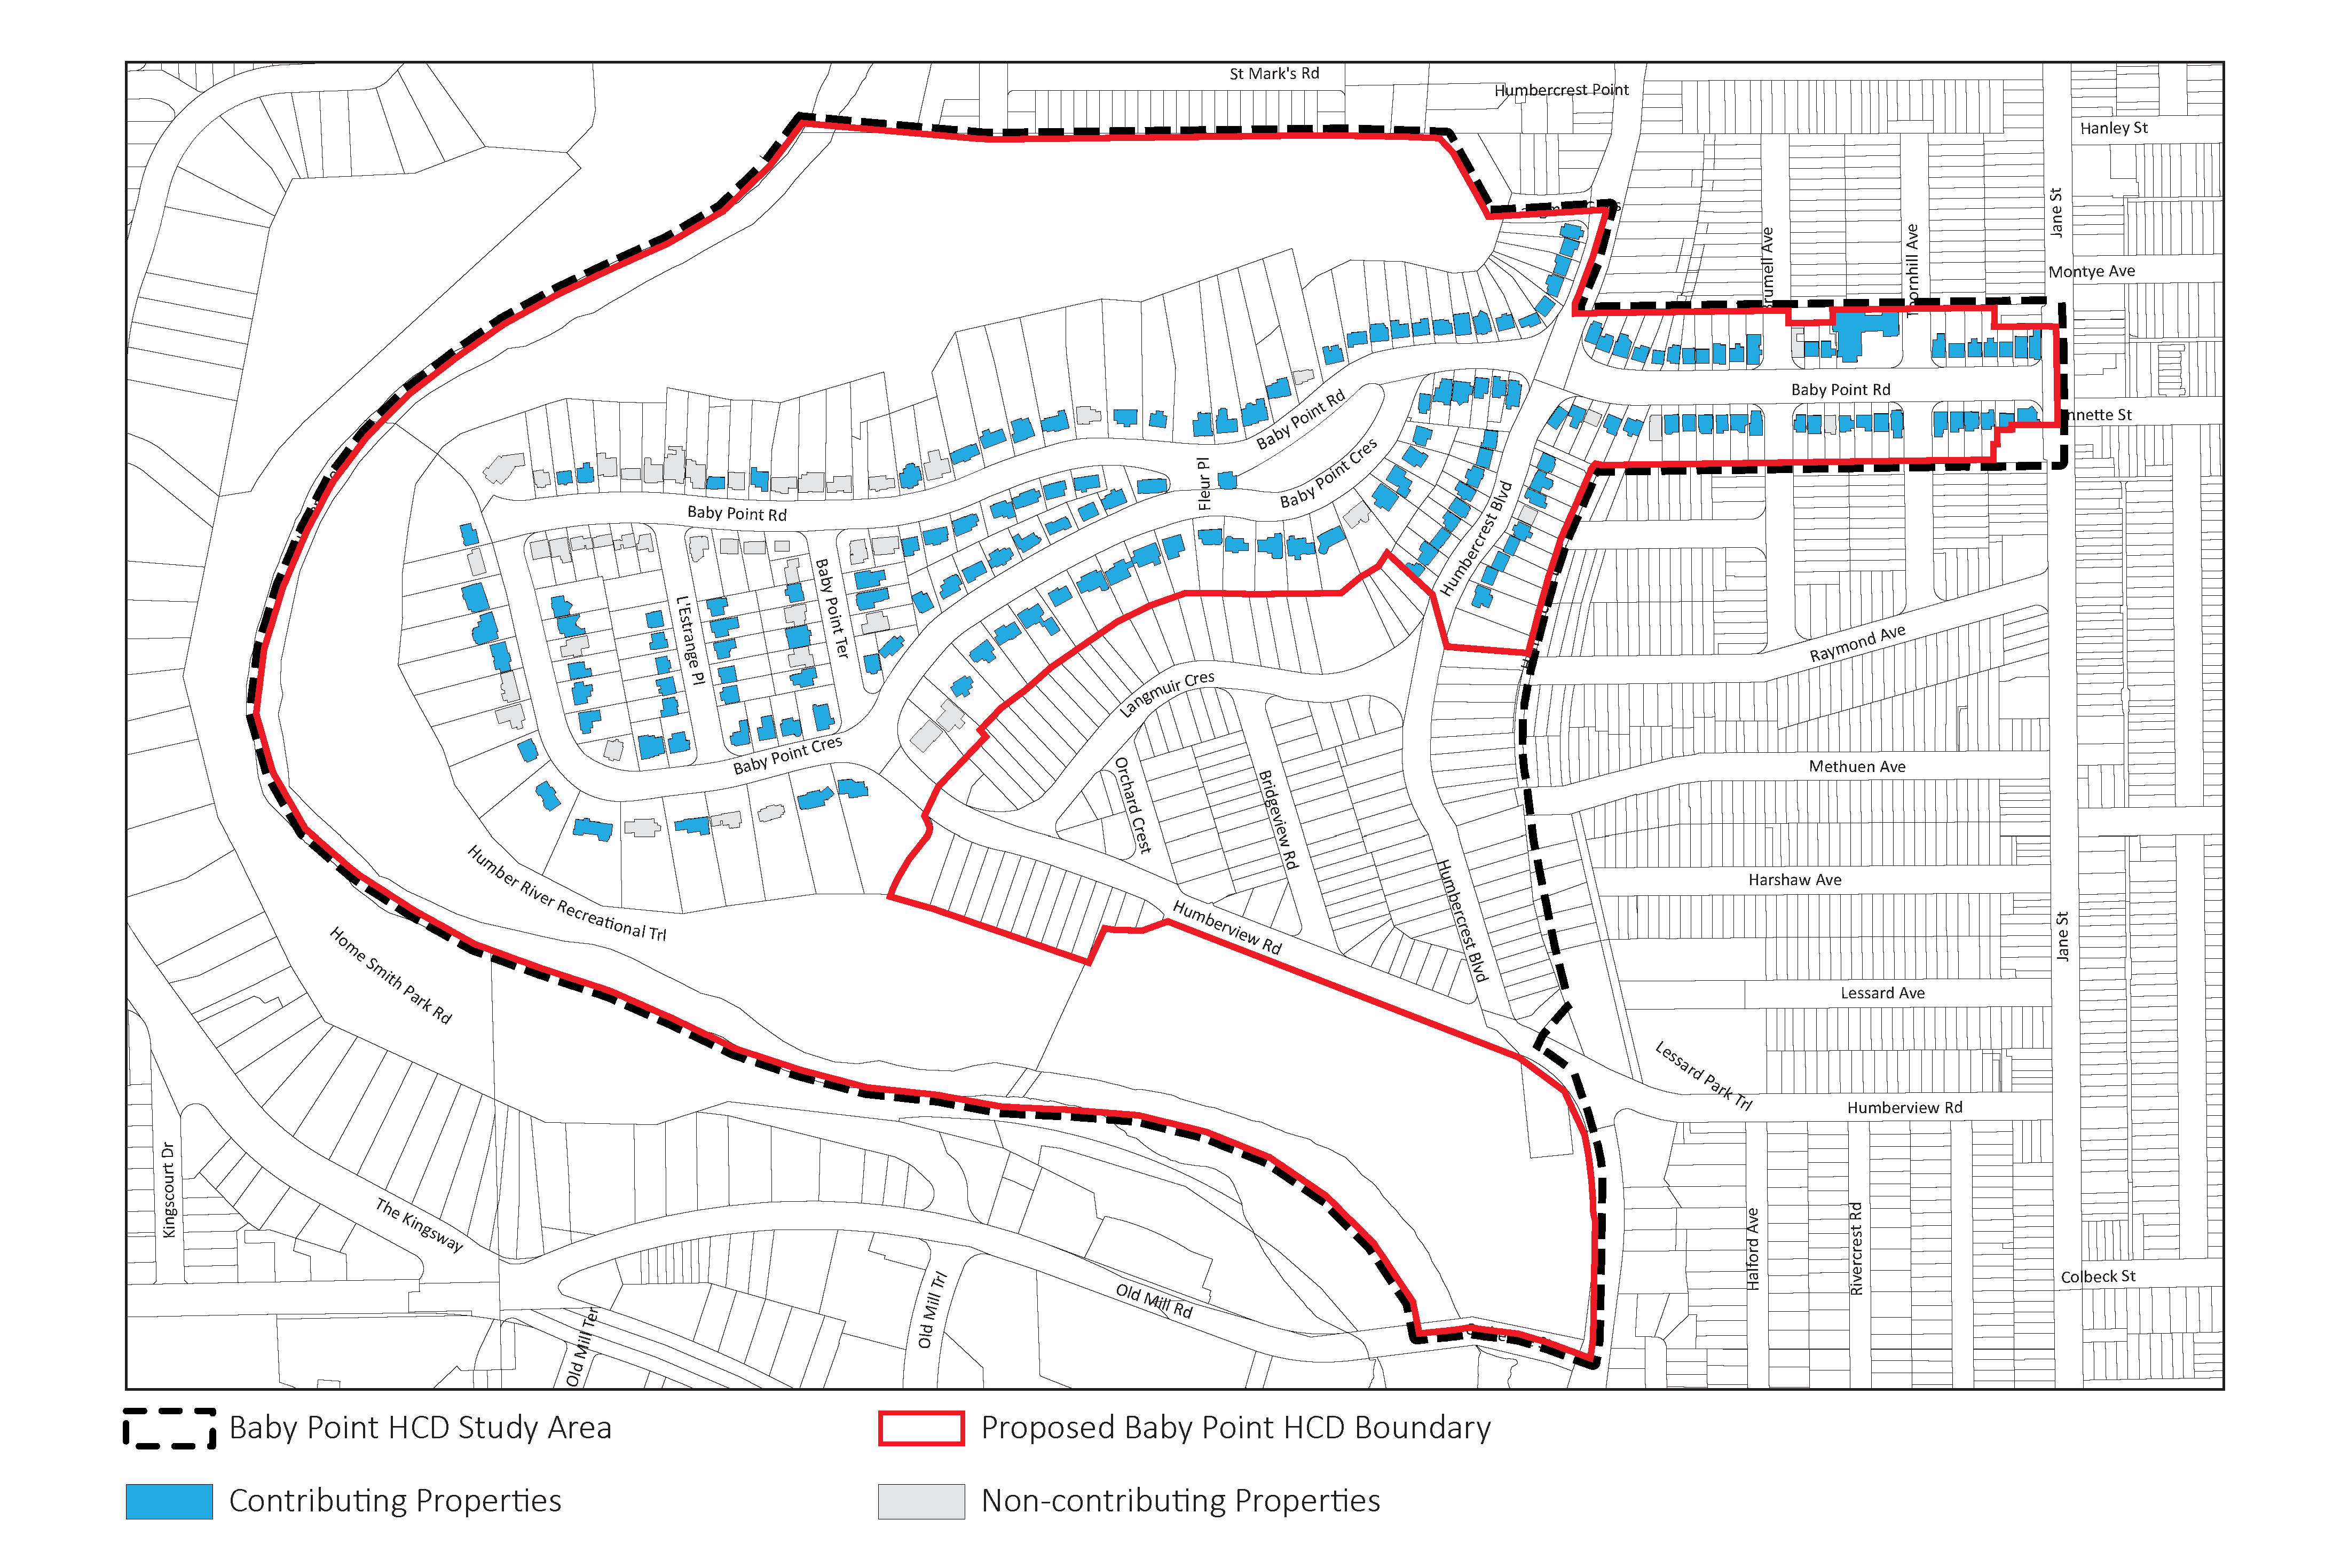 Map of the Baby Point Heritage Conservation District illustrating the proposed boundary and contributing and non-contributing properties. The proposed boundary includes all of Baby Point Road, Baby Point Crescent, L’Estrange Place, Baby Point Terrace, and Fleur Place. It includes some properties on Humbercrest Road where it intersects with Baby Point Road. Most properties in this boundary are identified as contributing.